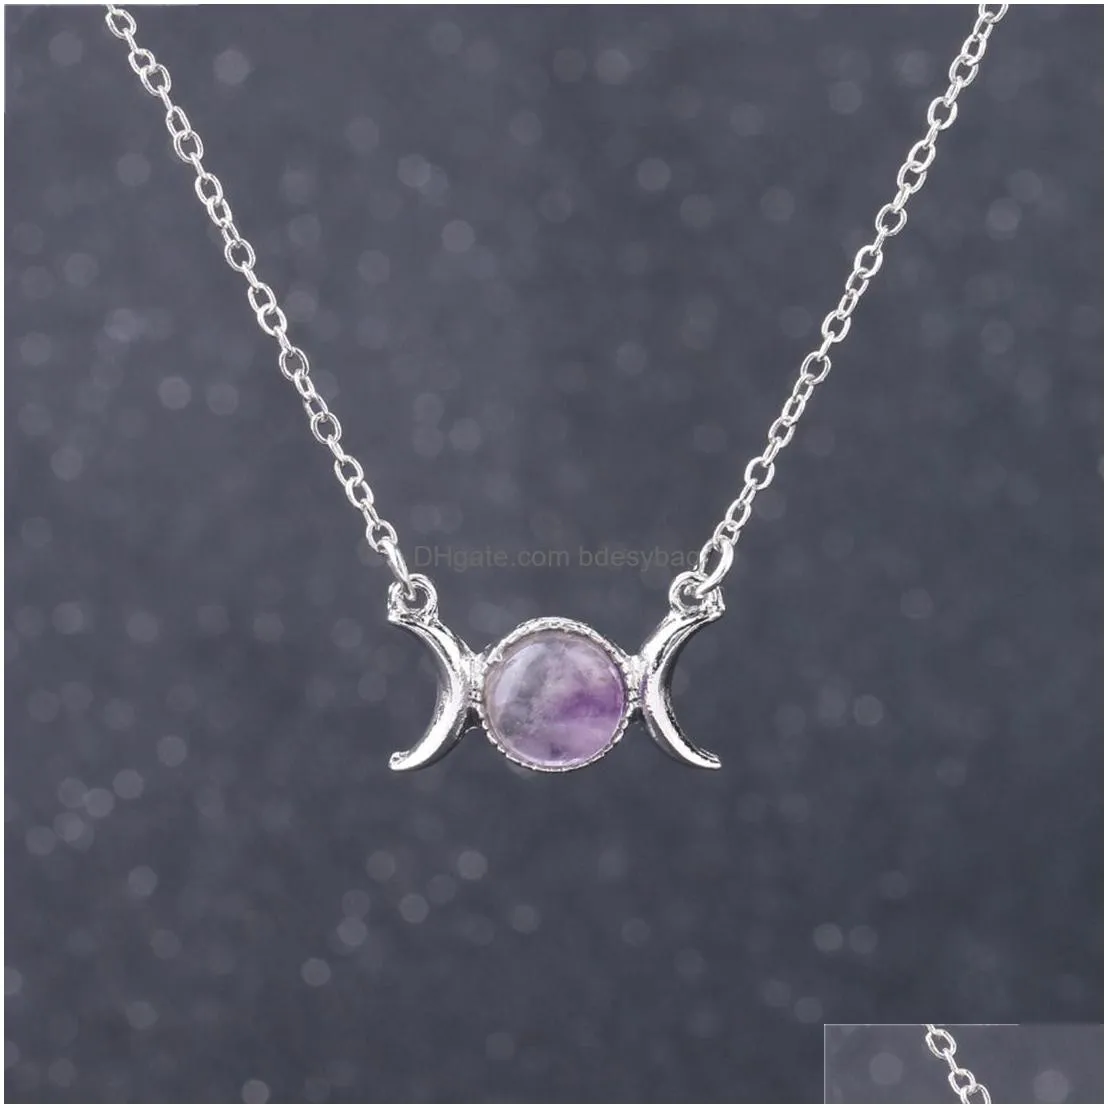 moon and sun necklace s925 sterling silver pendant forever love sparkling crescent jewelry gift for women girls